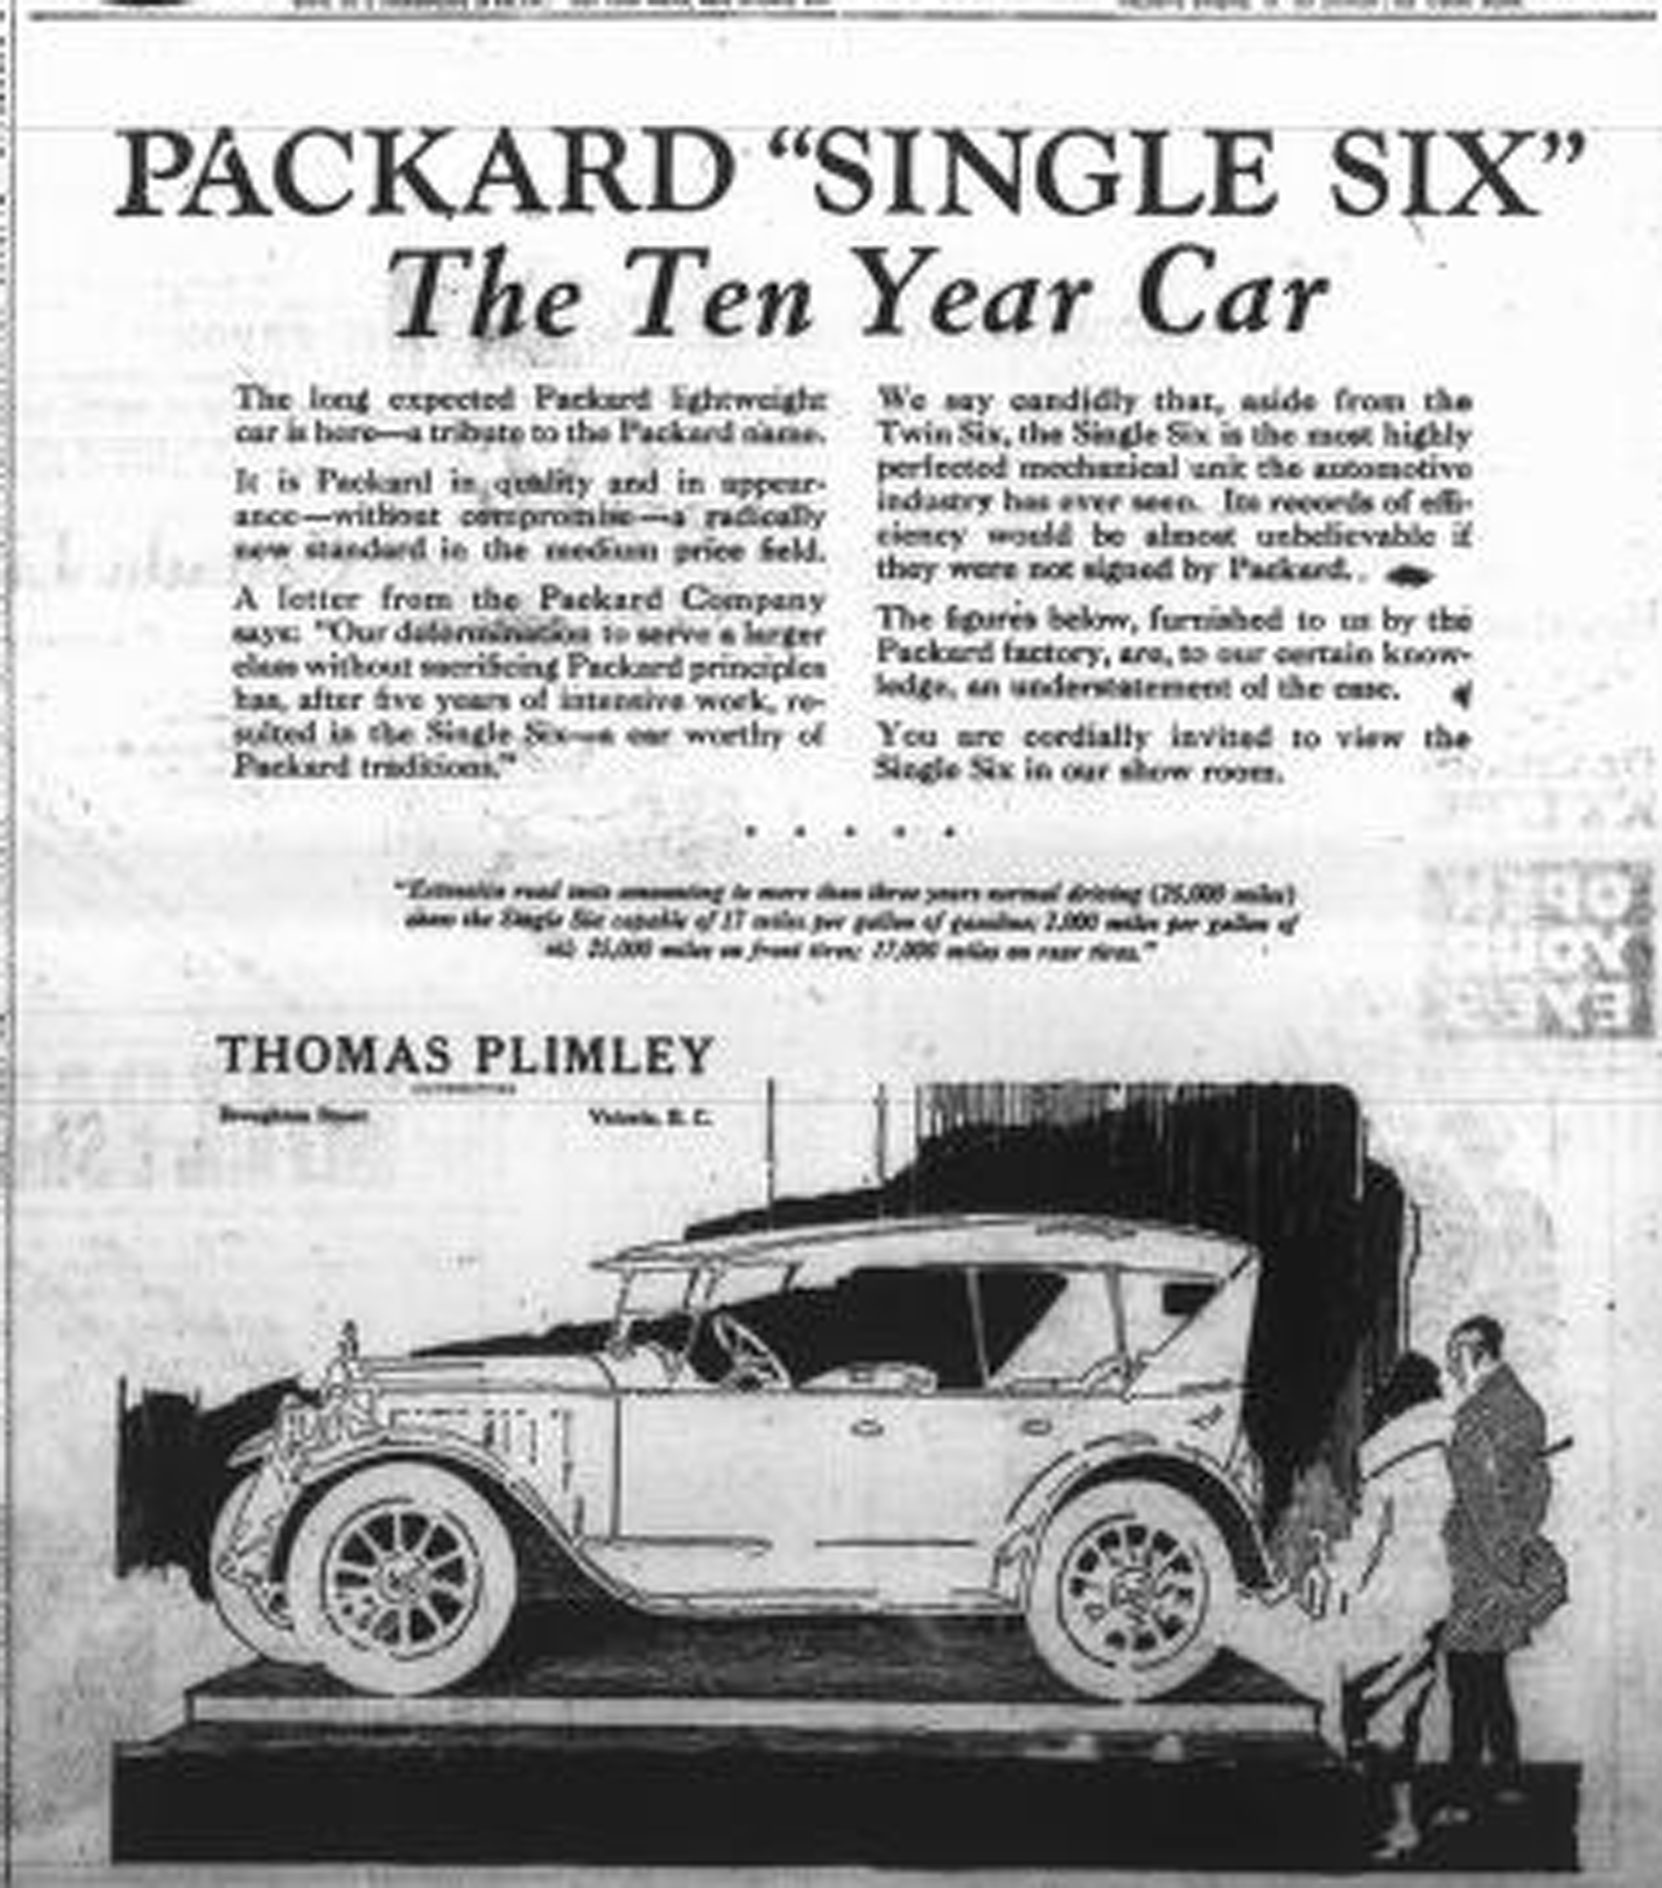 Packard advertisement in a Victoria newspaper, December 1920 [Author's collection]